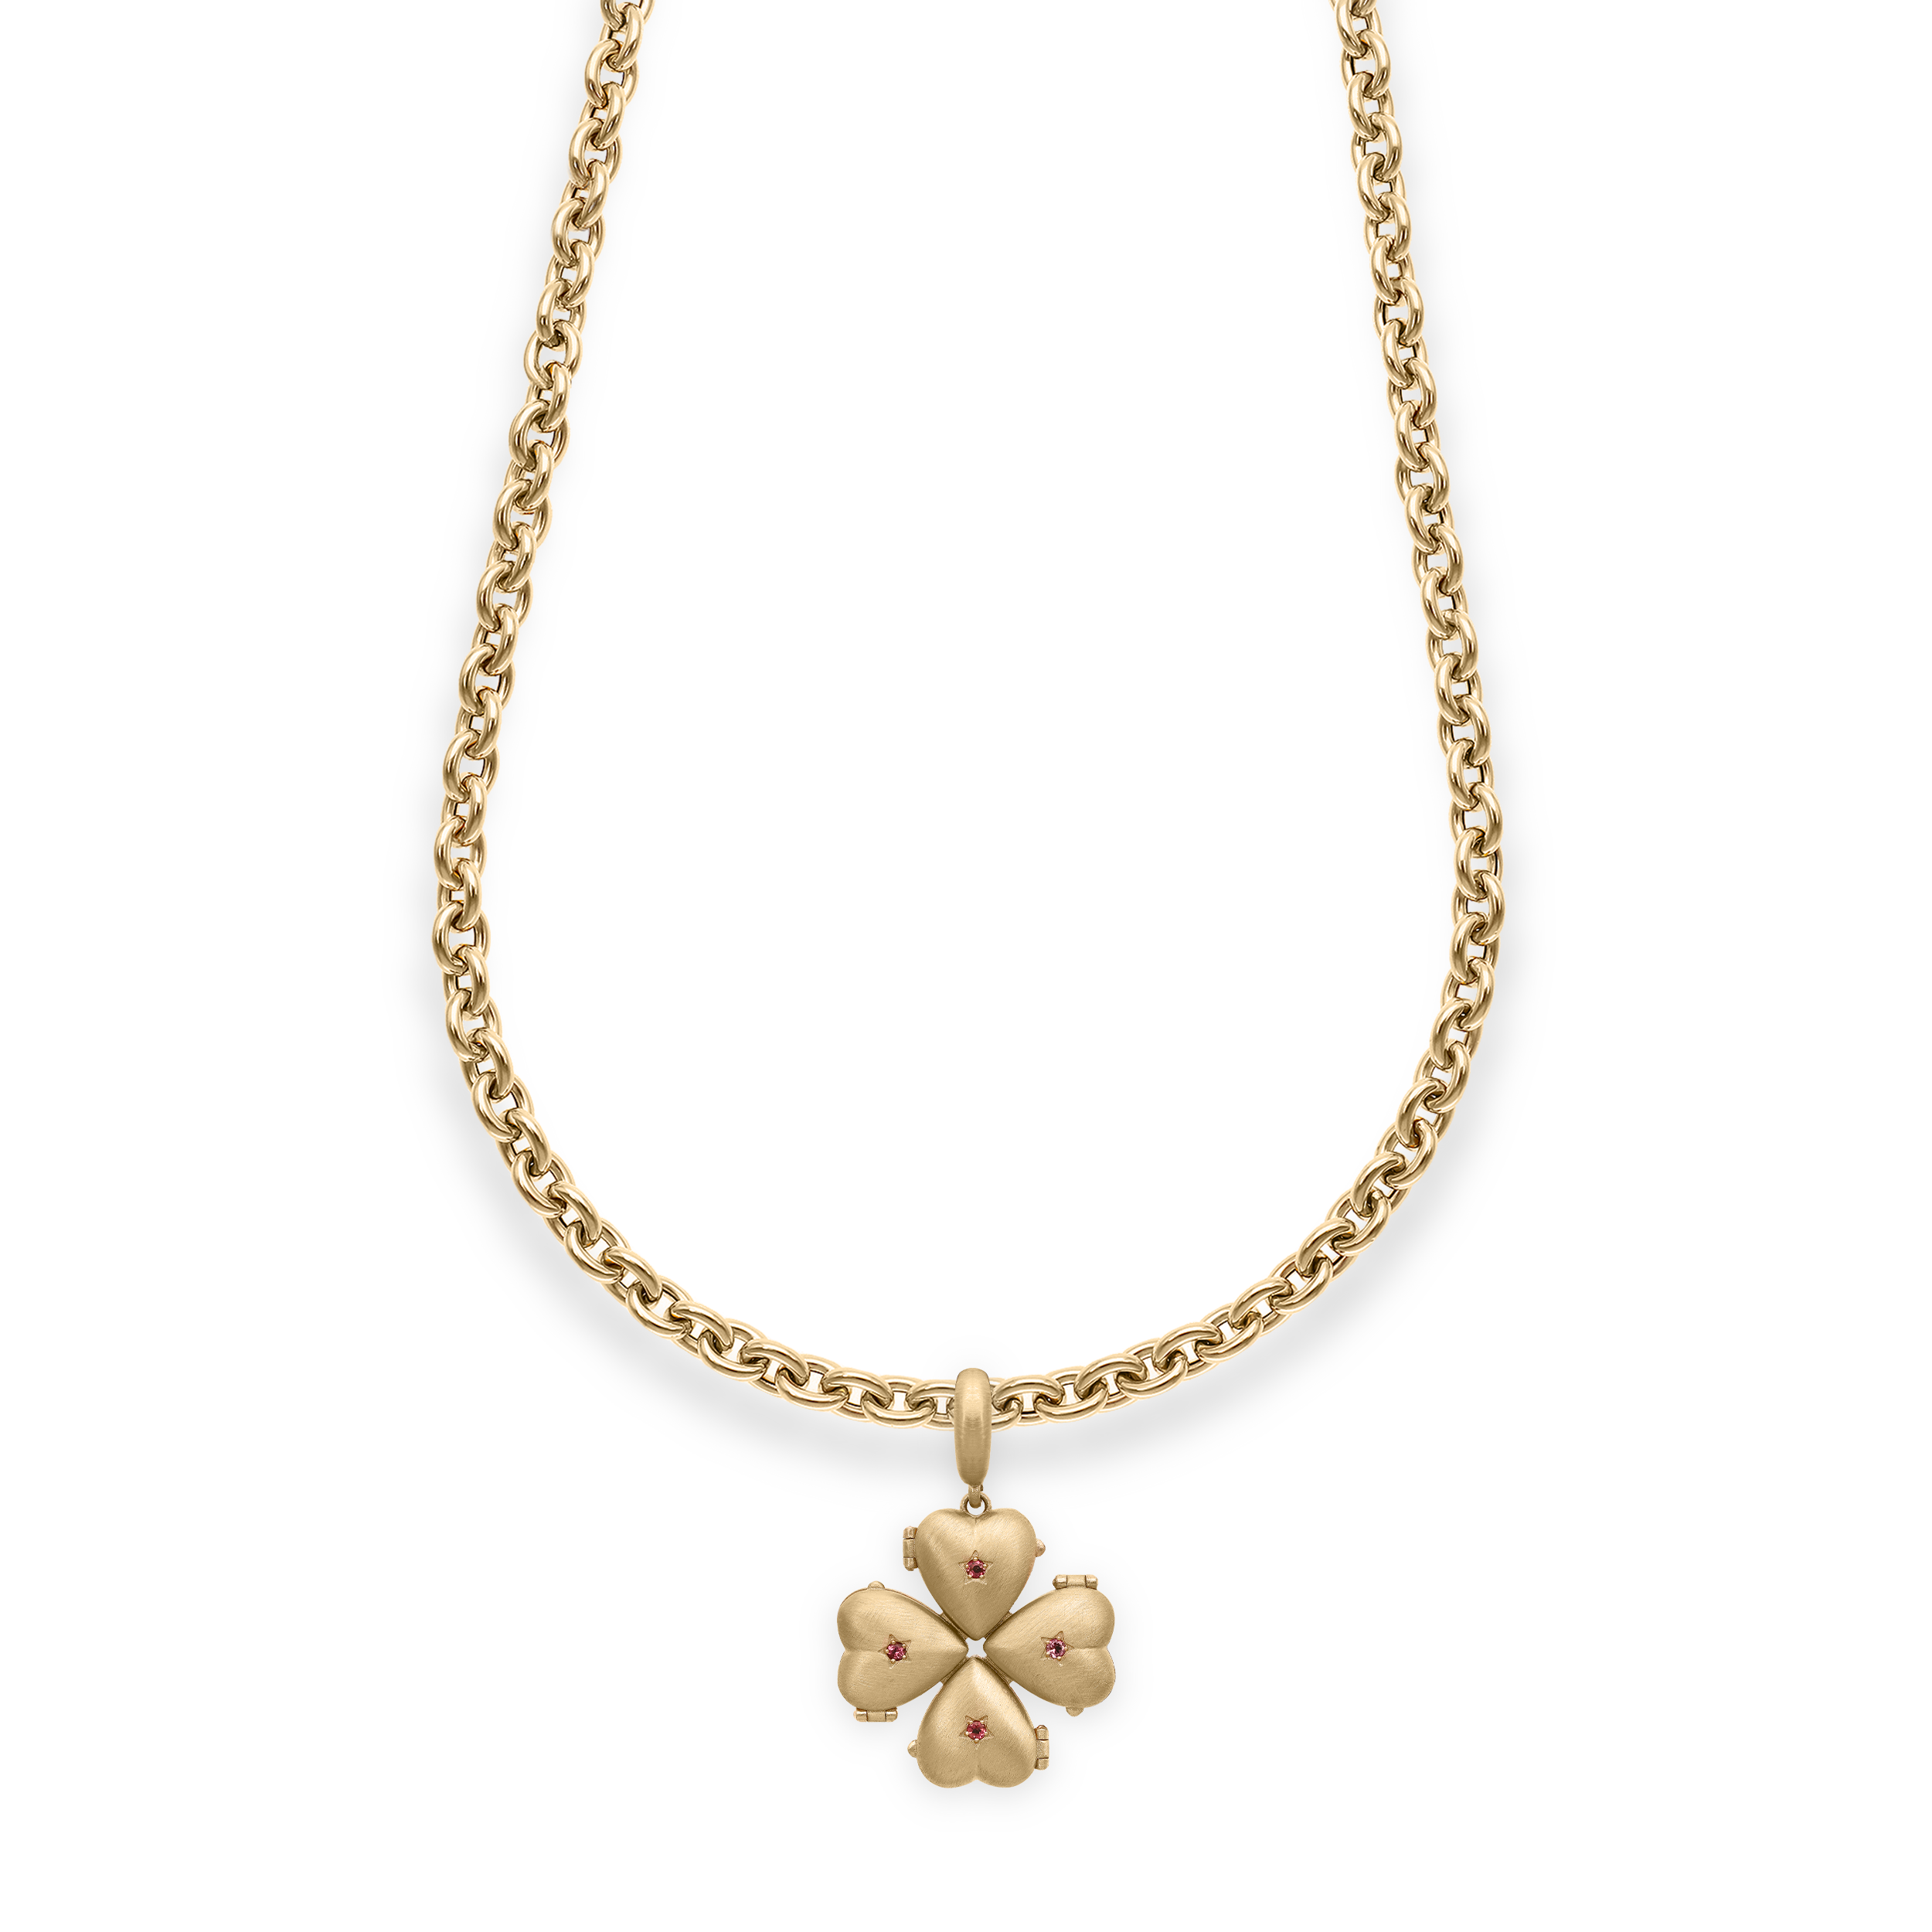 Bruno Brushed Yellow Gold and Tourmalines "Secret" Clover Pendant on Long Chain 